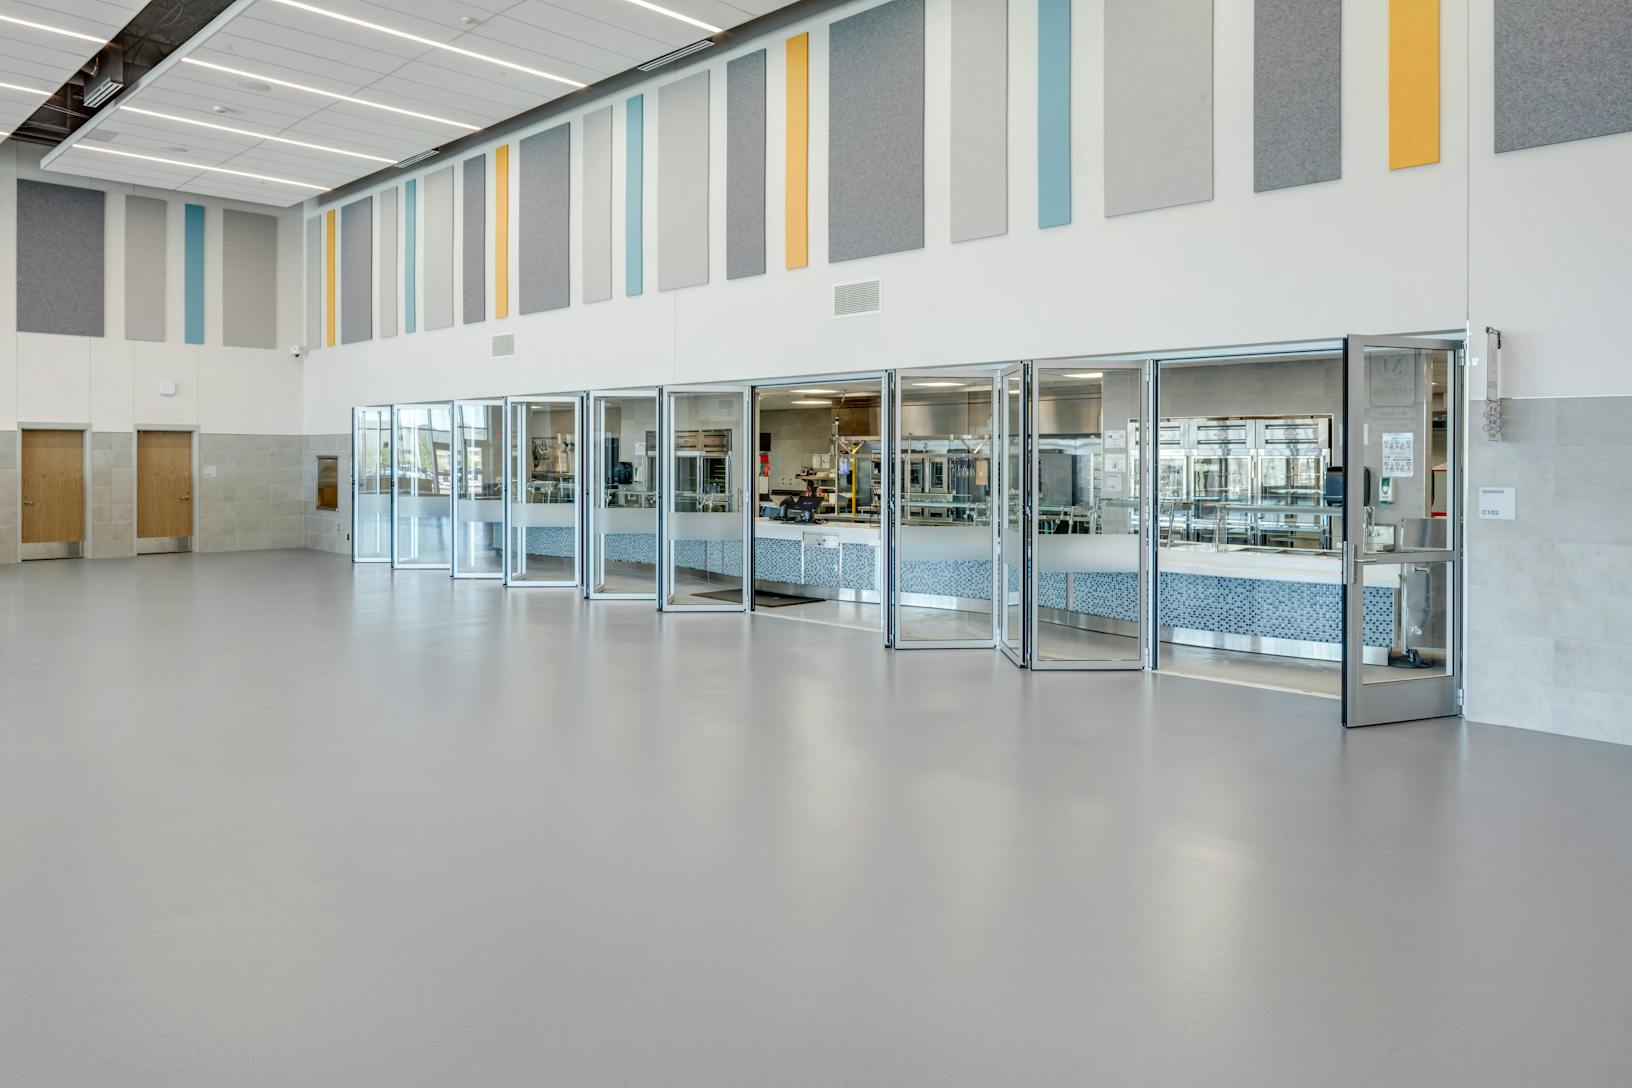 Classroom acoustical movable glass walls at Minett Elementary- Folding exterior